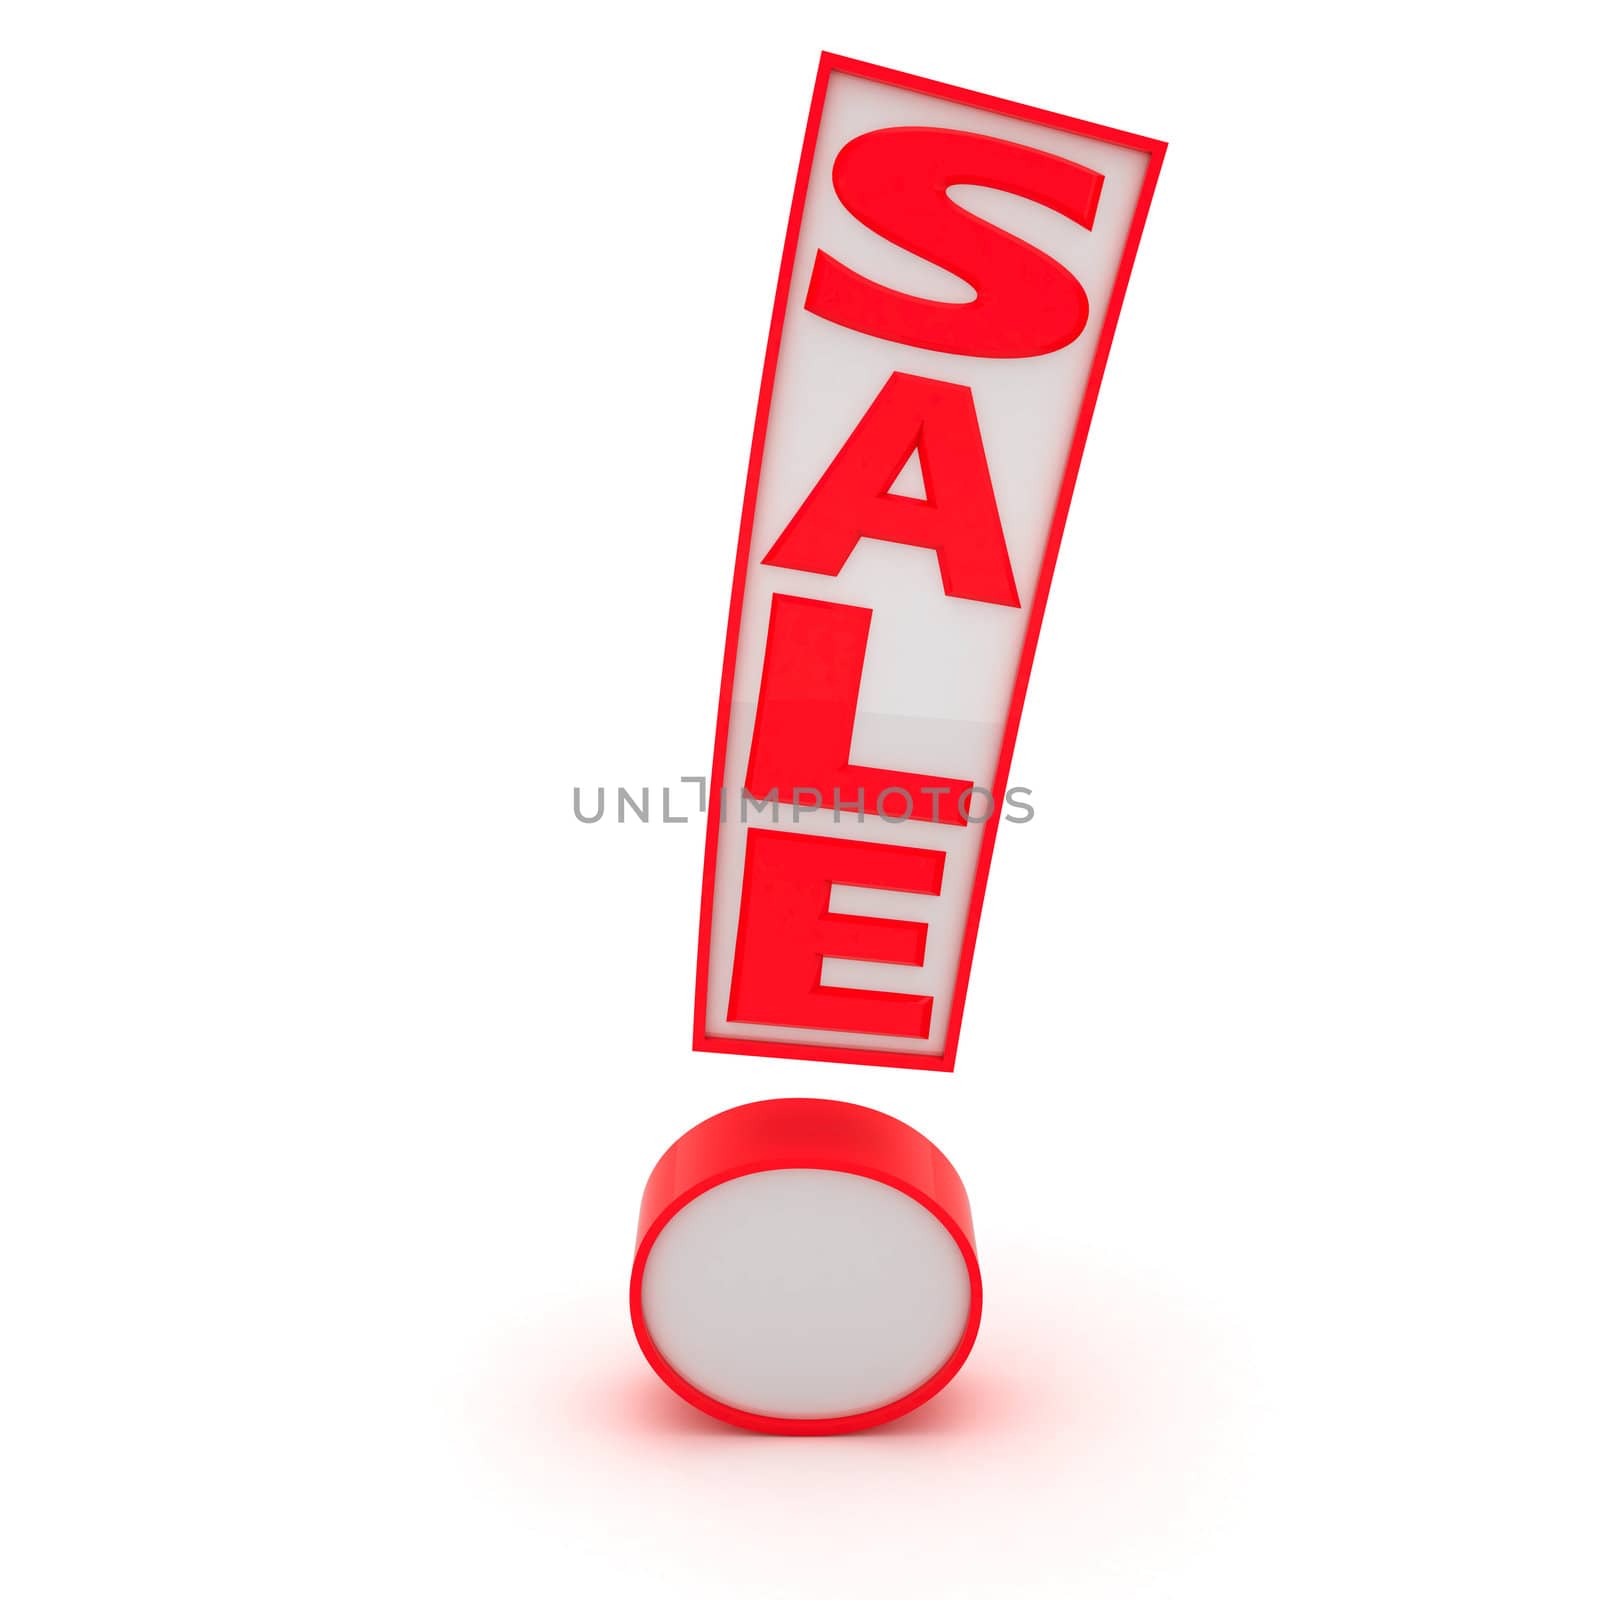 Exclamation mark with word "Sale" isolated on the white background